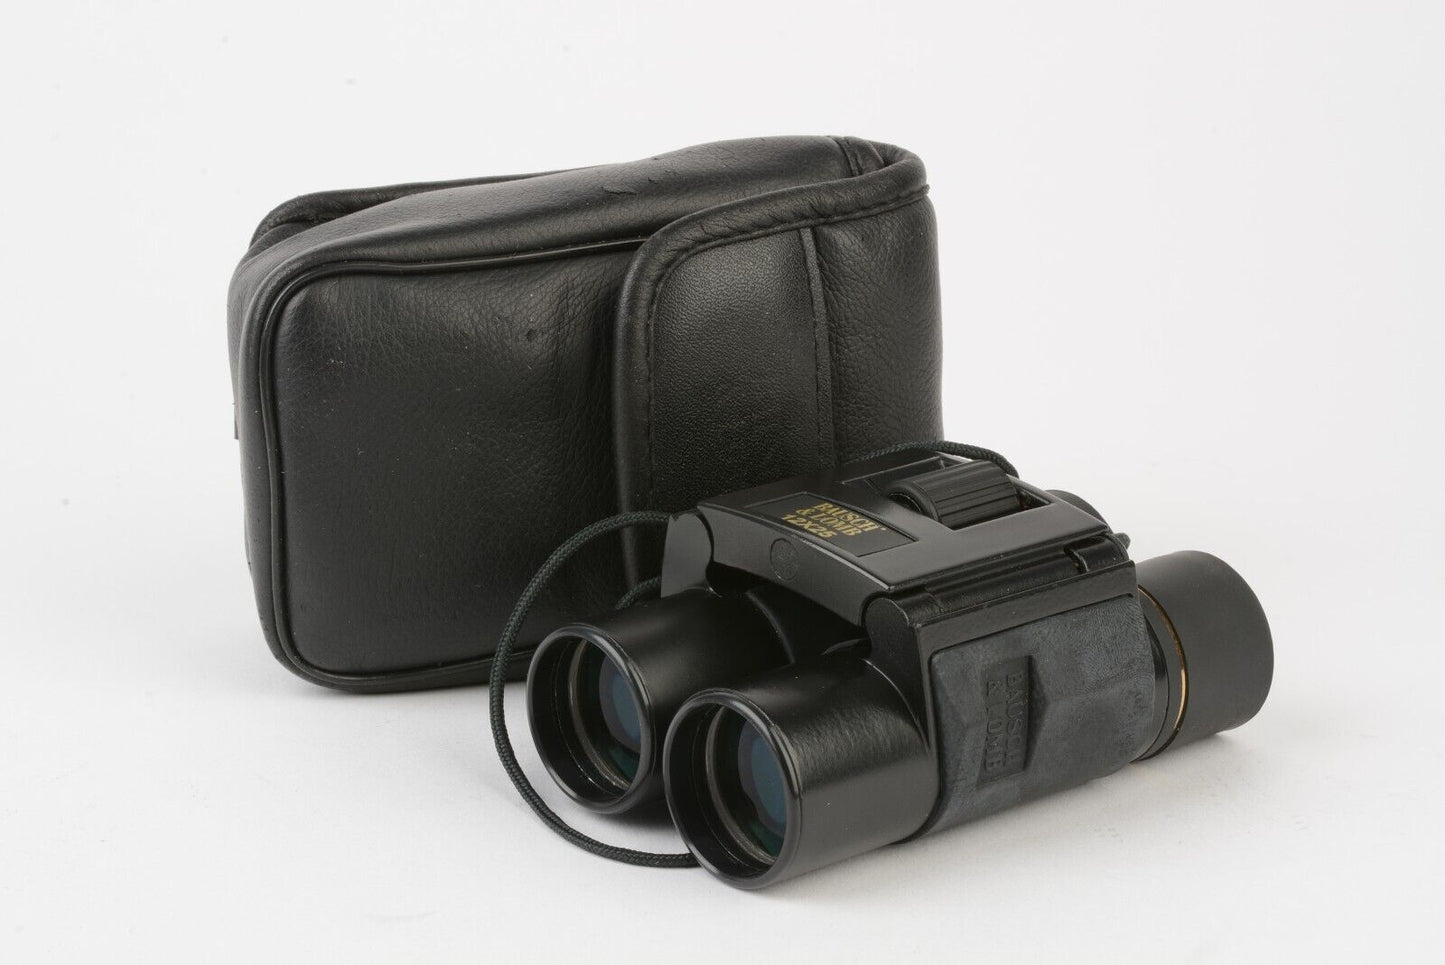 EXC++ BAUSCH & LOMB LEGACY 12-1225 12x25 COMPACT BINOCULARS +CASE & STRAP